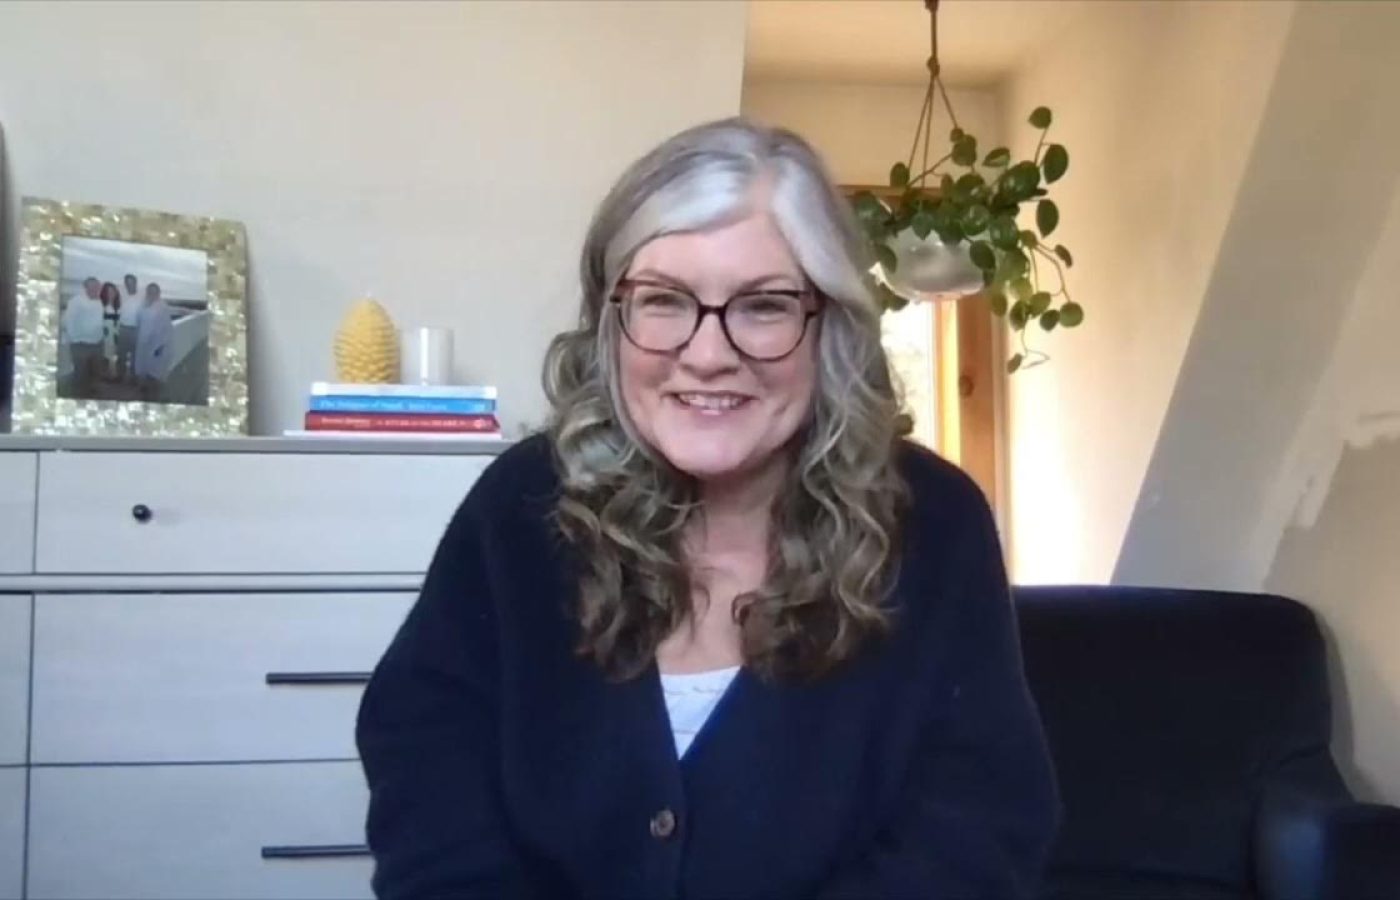 Janet smiling while sitting in her office chair wearing big glasses